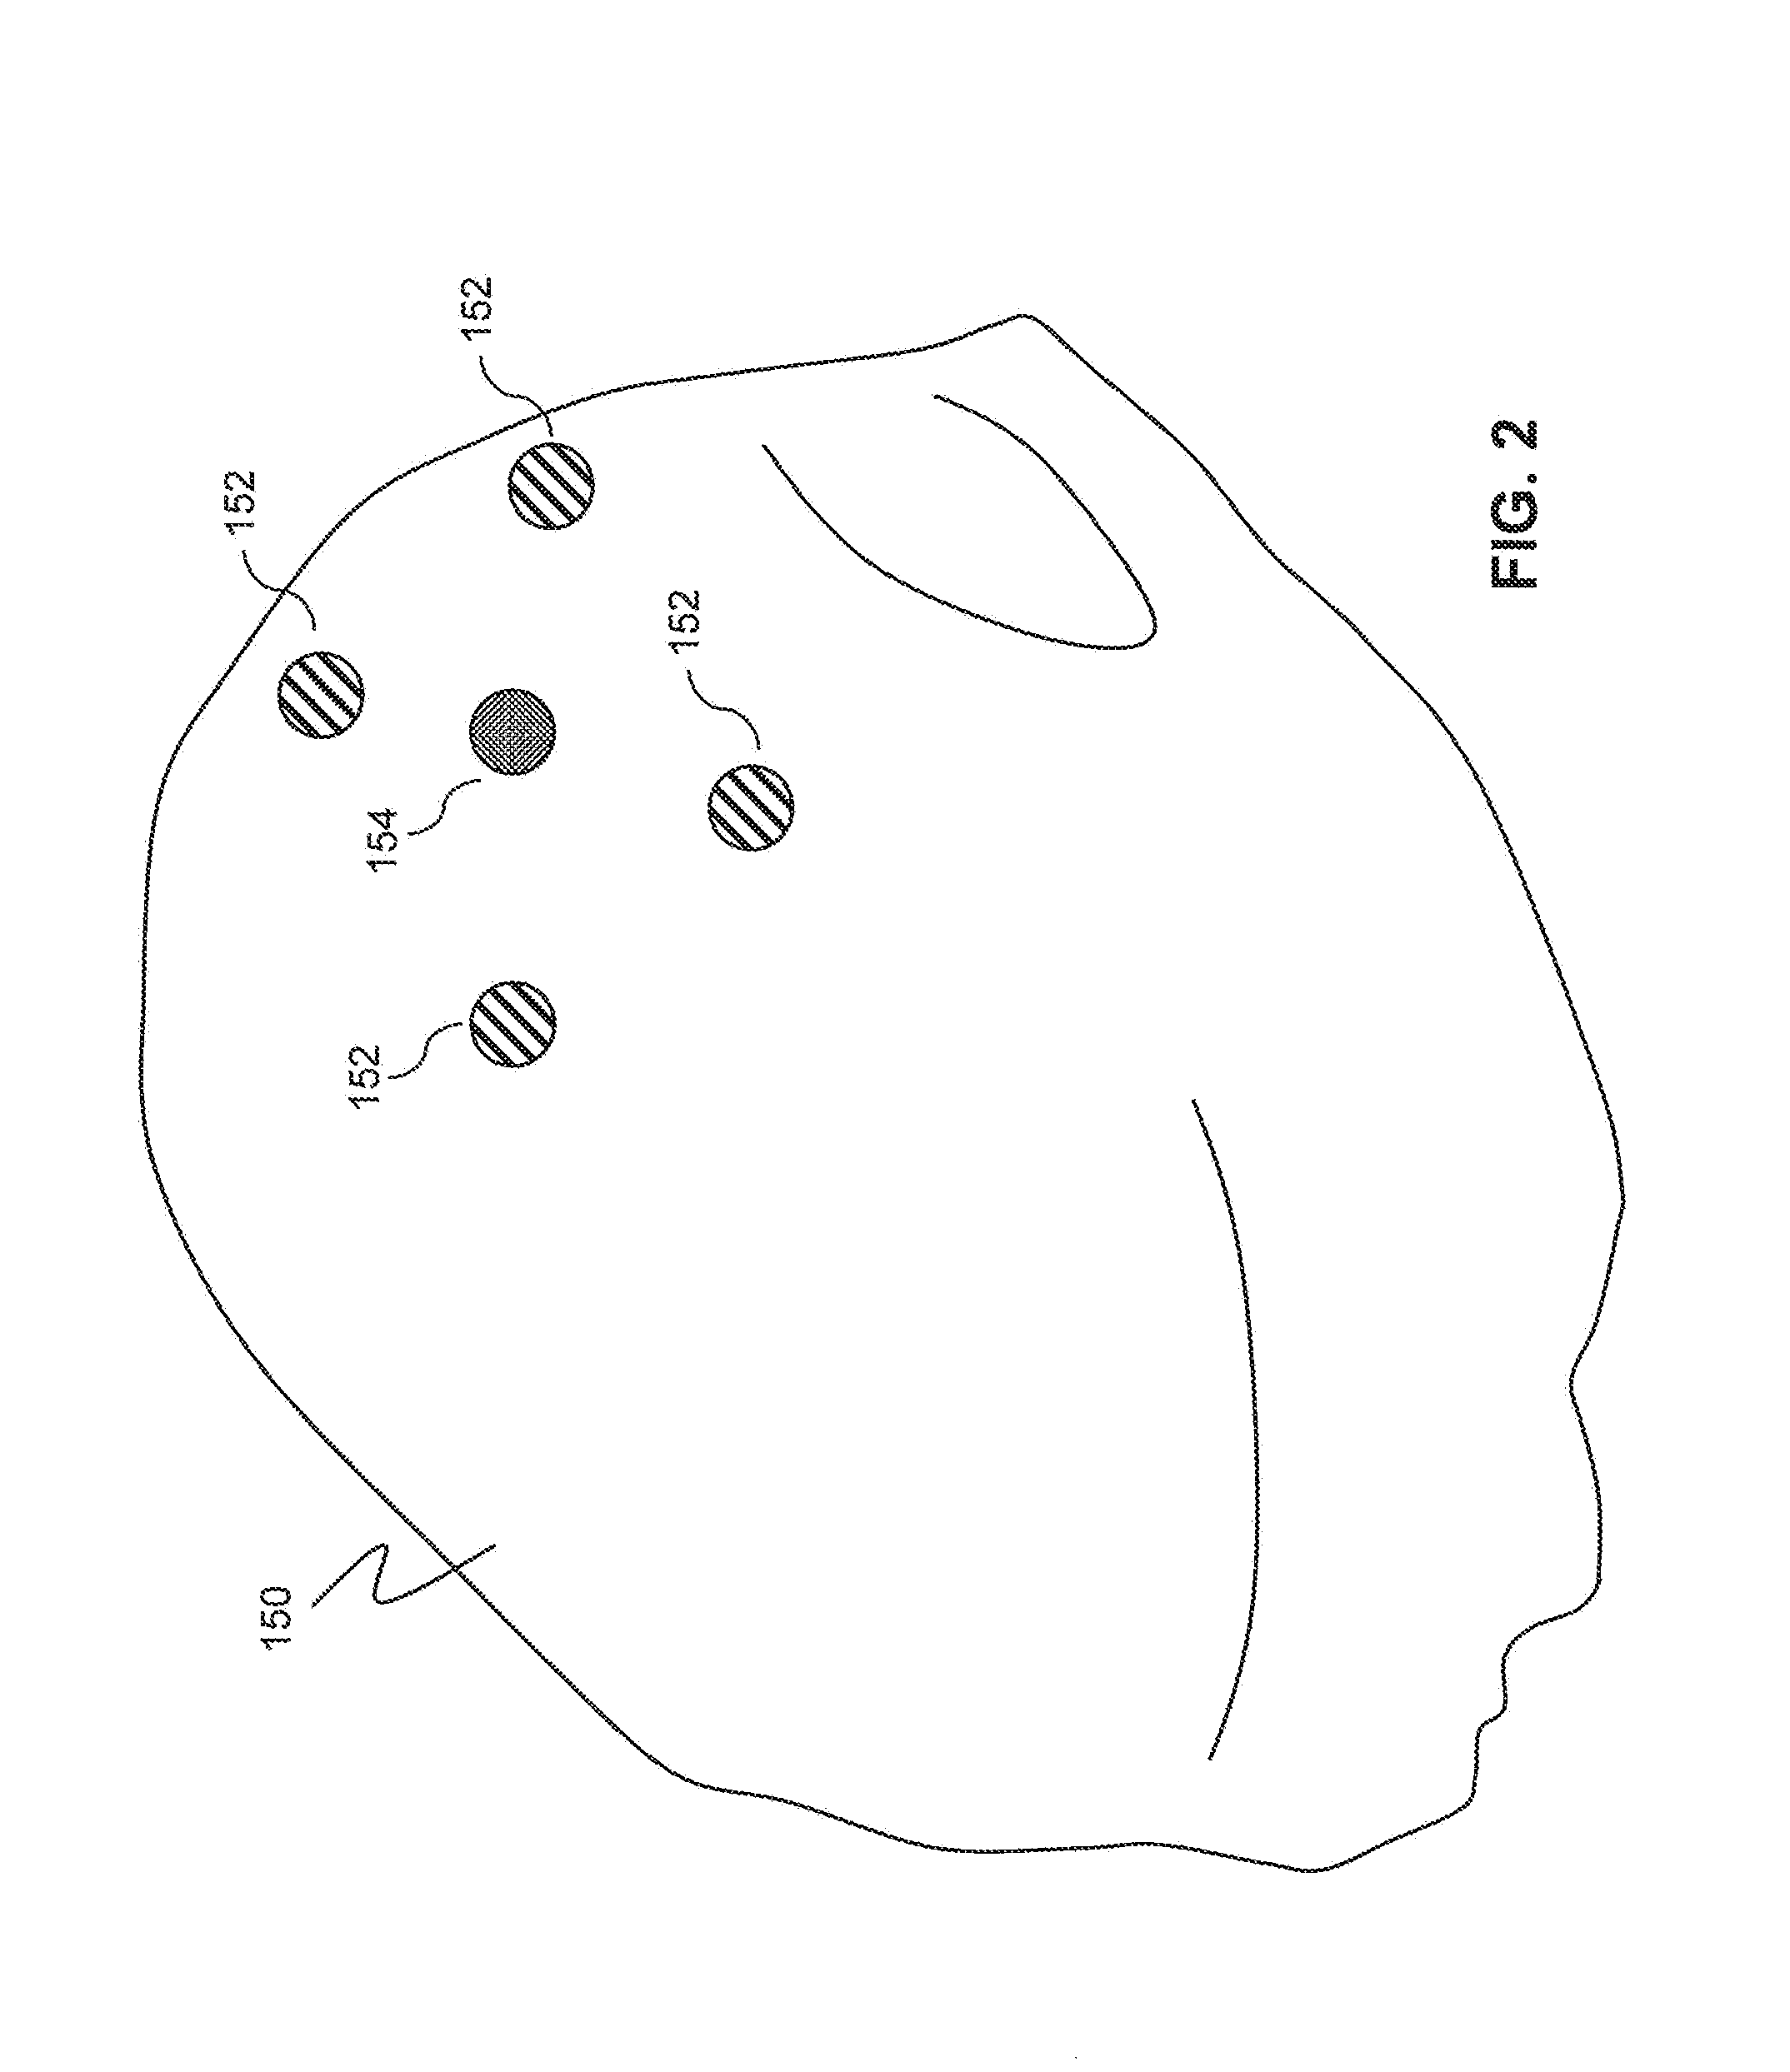 Wearable, unsupervised transcranial direct current stimulation (tDCS) device for movement disorder therapy, and method of using